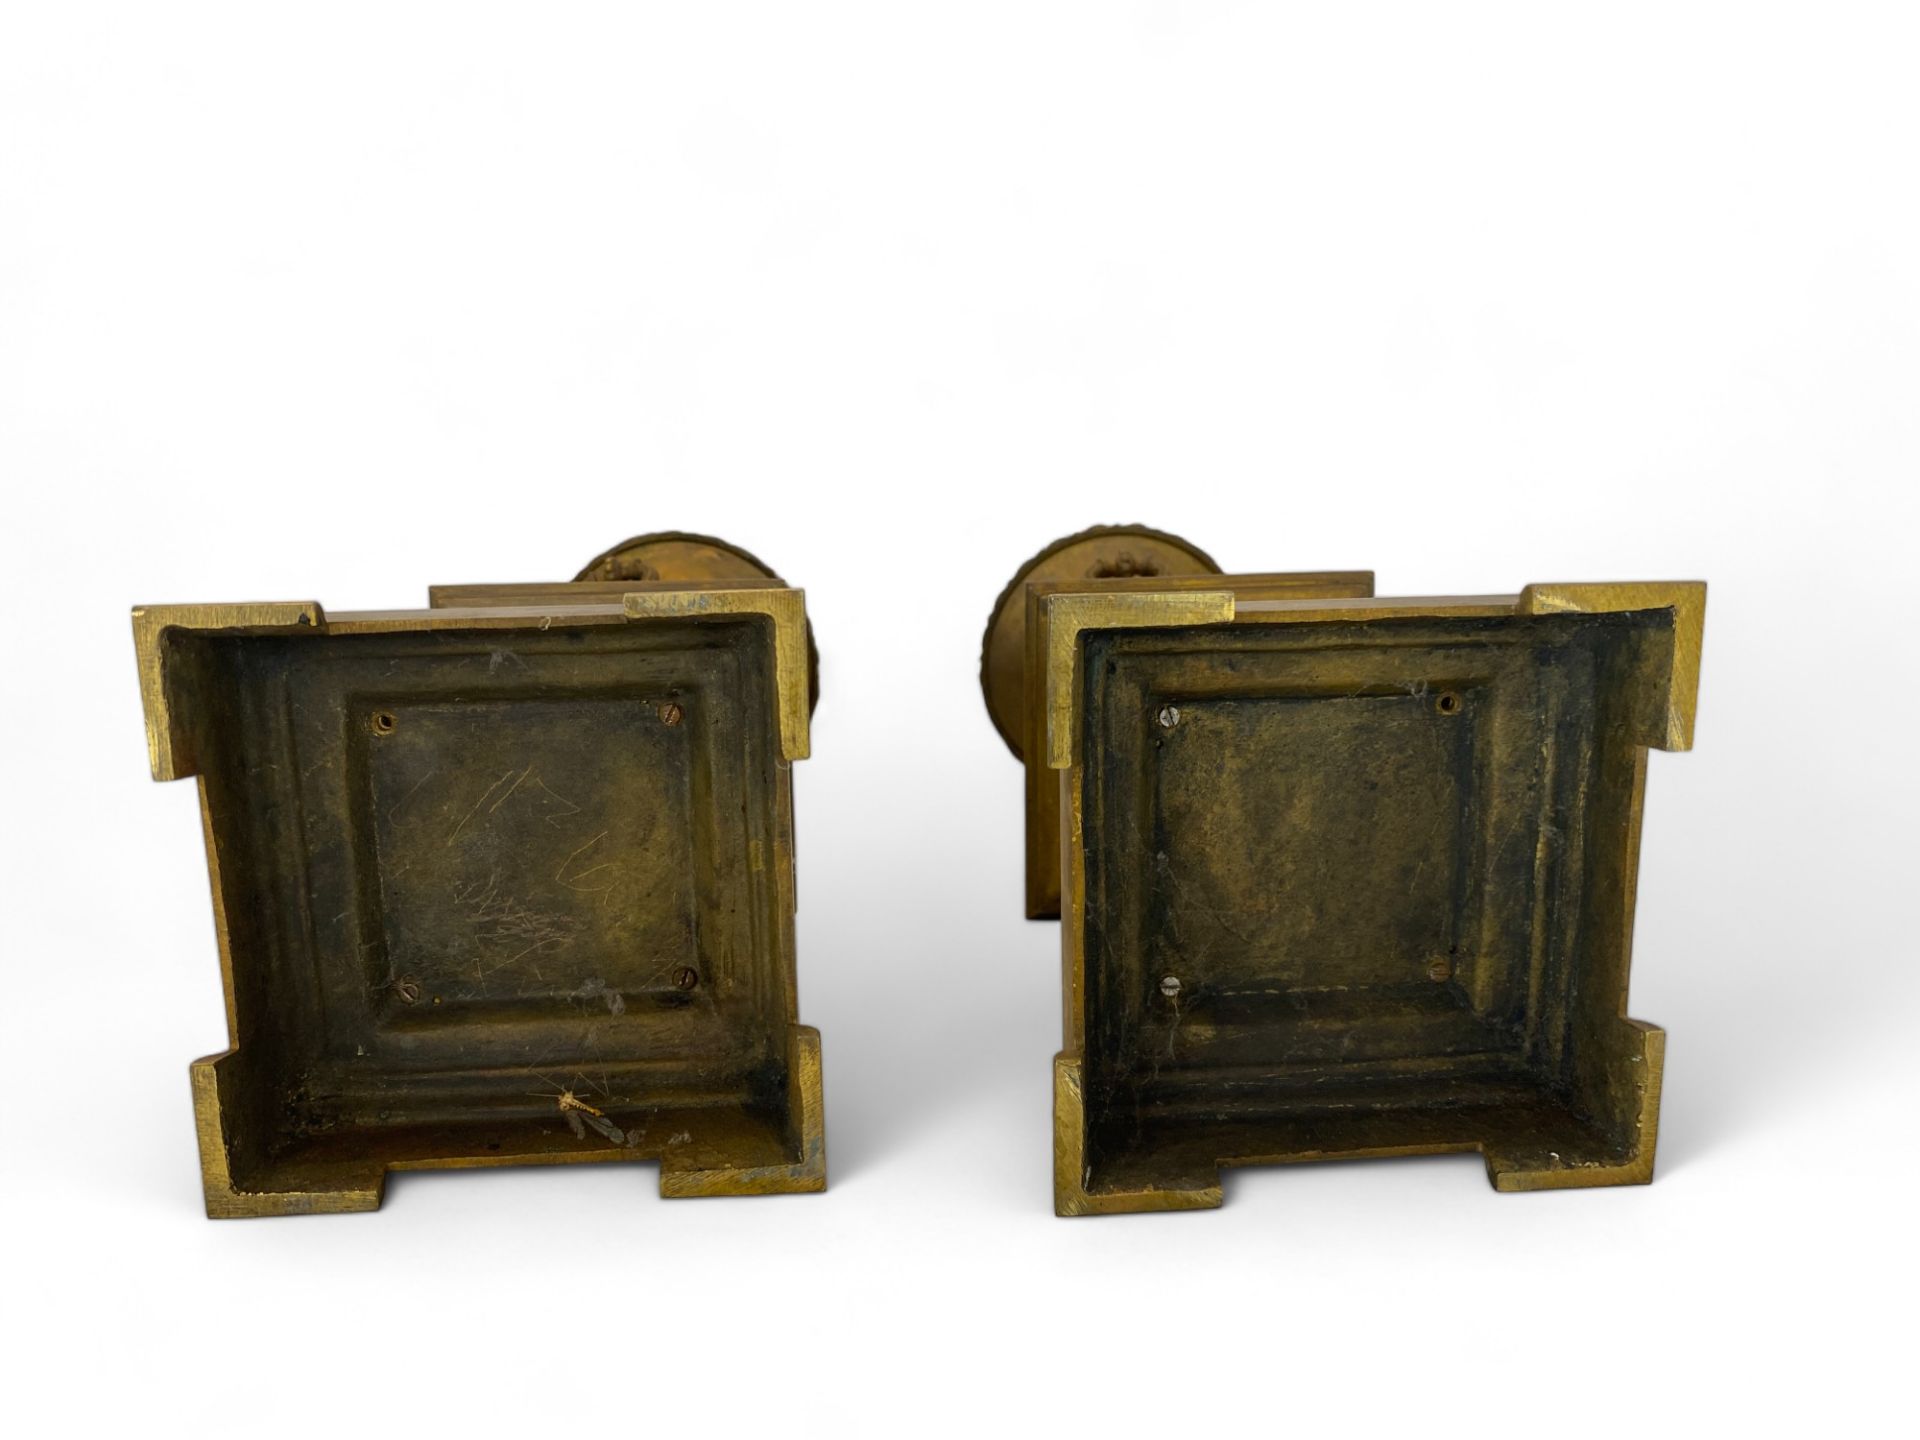 A pair of 19th century gilt bronze chimney ornaments - Image 12 of 12